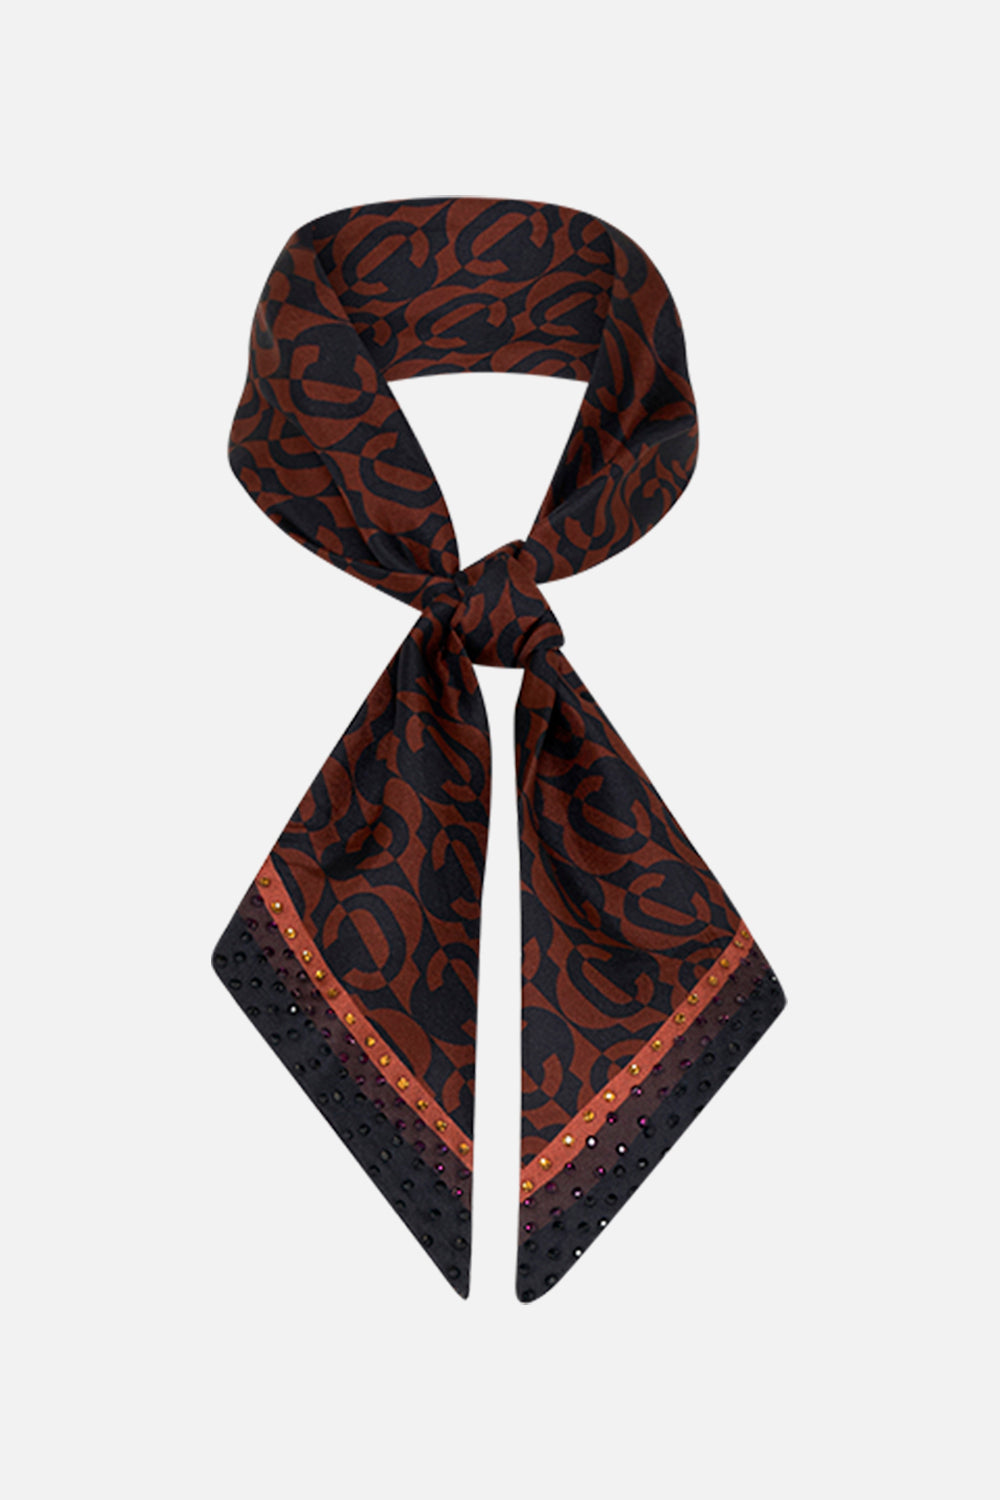 Product view of CAMILLA silk skinny neck scarf in Feeling Fresco print